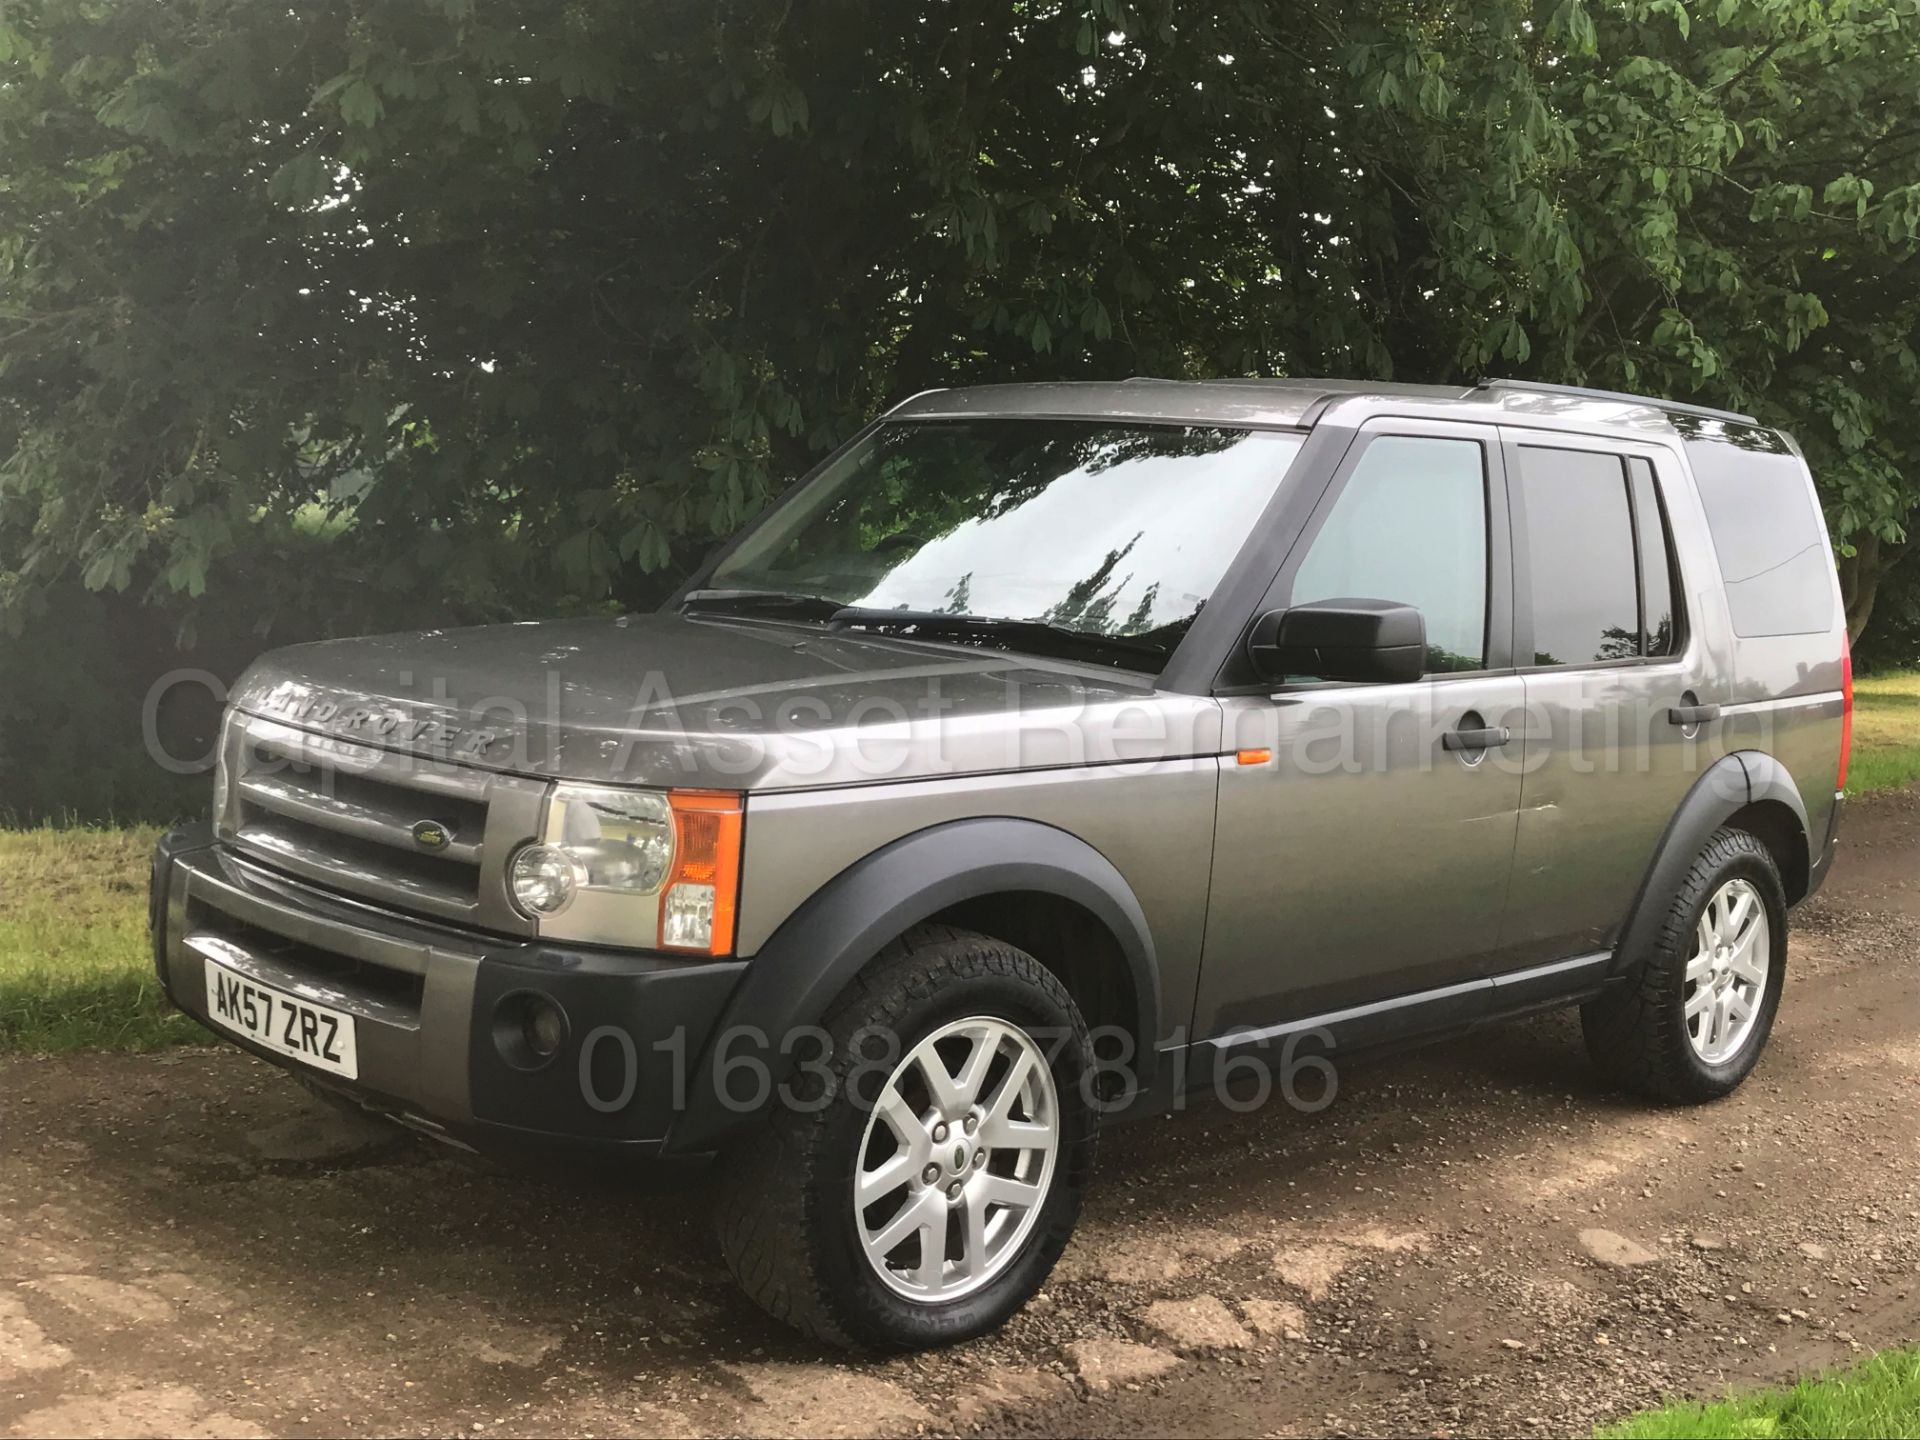 (On Sale) LAND ROVER DISCOVERY 3 'XS EDITION' **COMMERCIAL VAN**(2008 MODEL) 'TDV6-190 BHP' (NO VAT) - Image 5 of 38